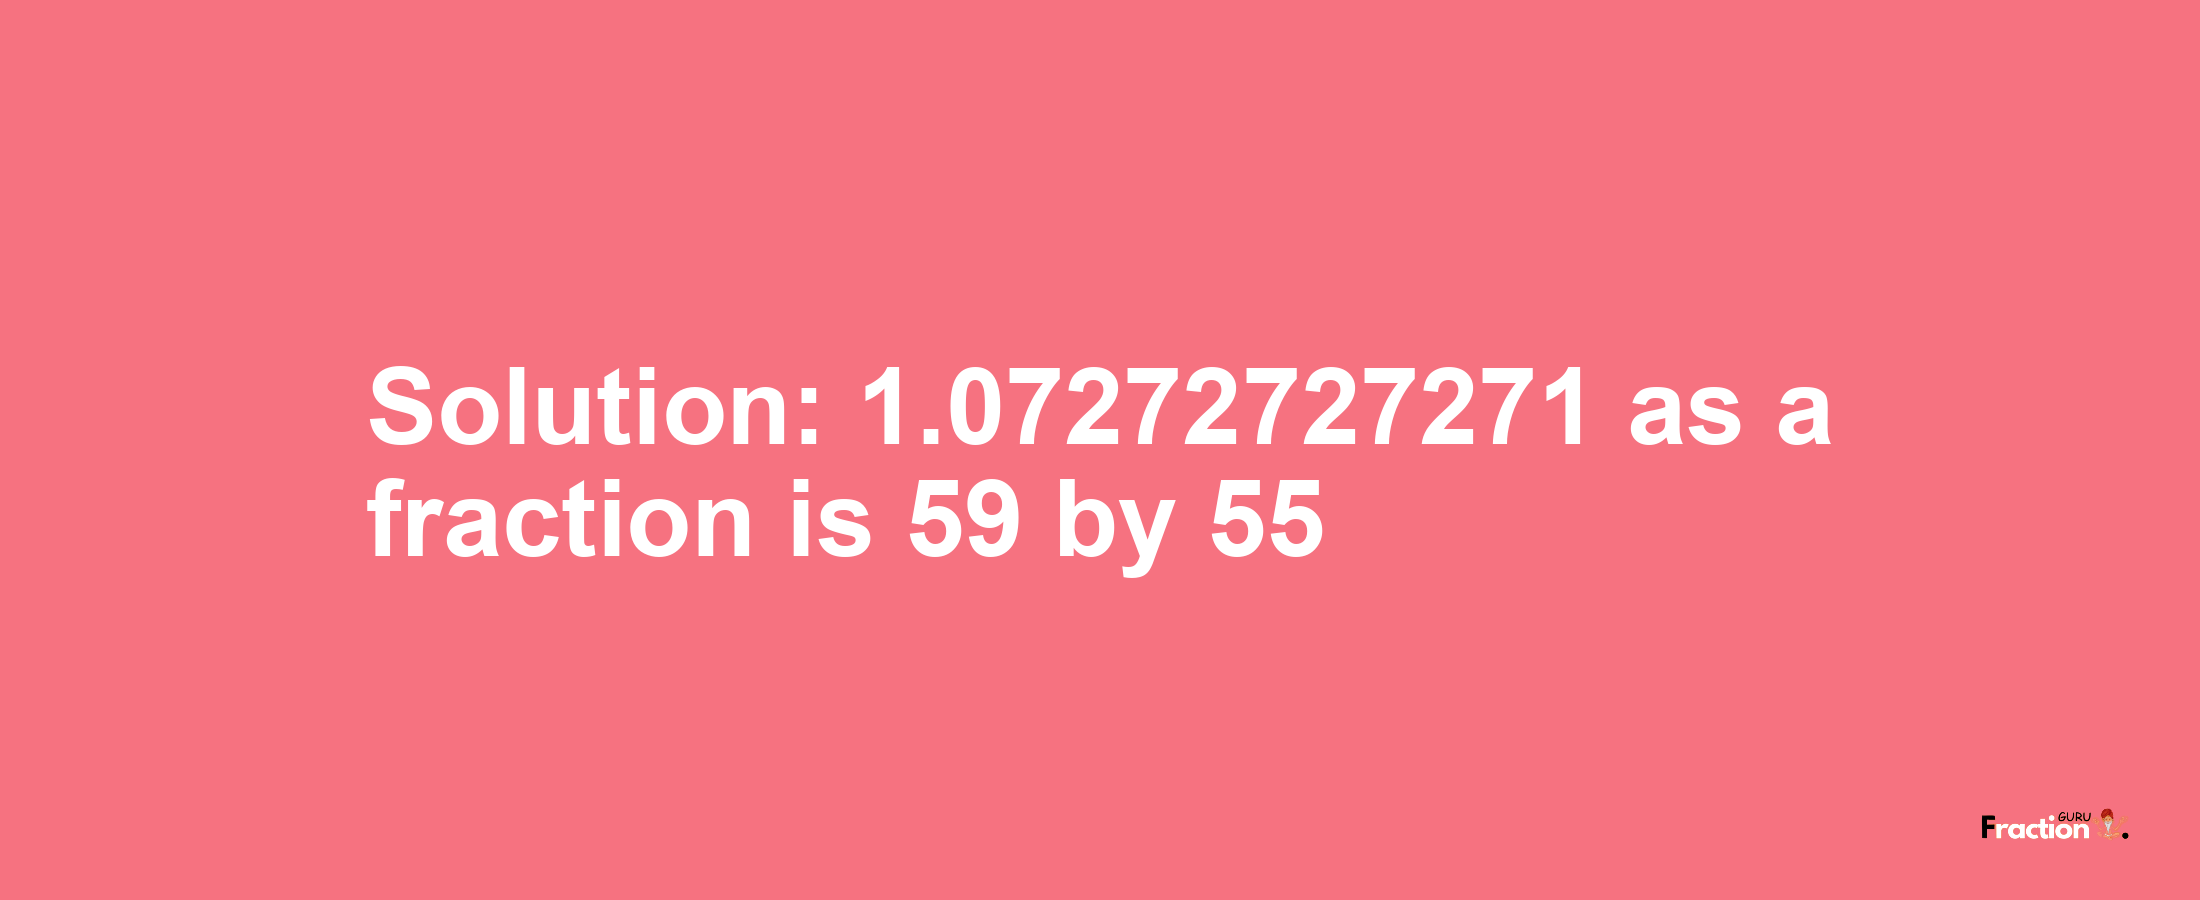 Solution:1.07272727271 as a fraction is 59/55